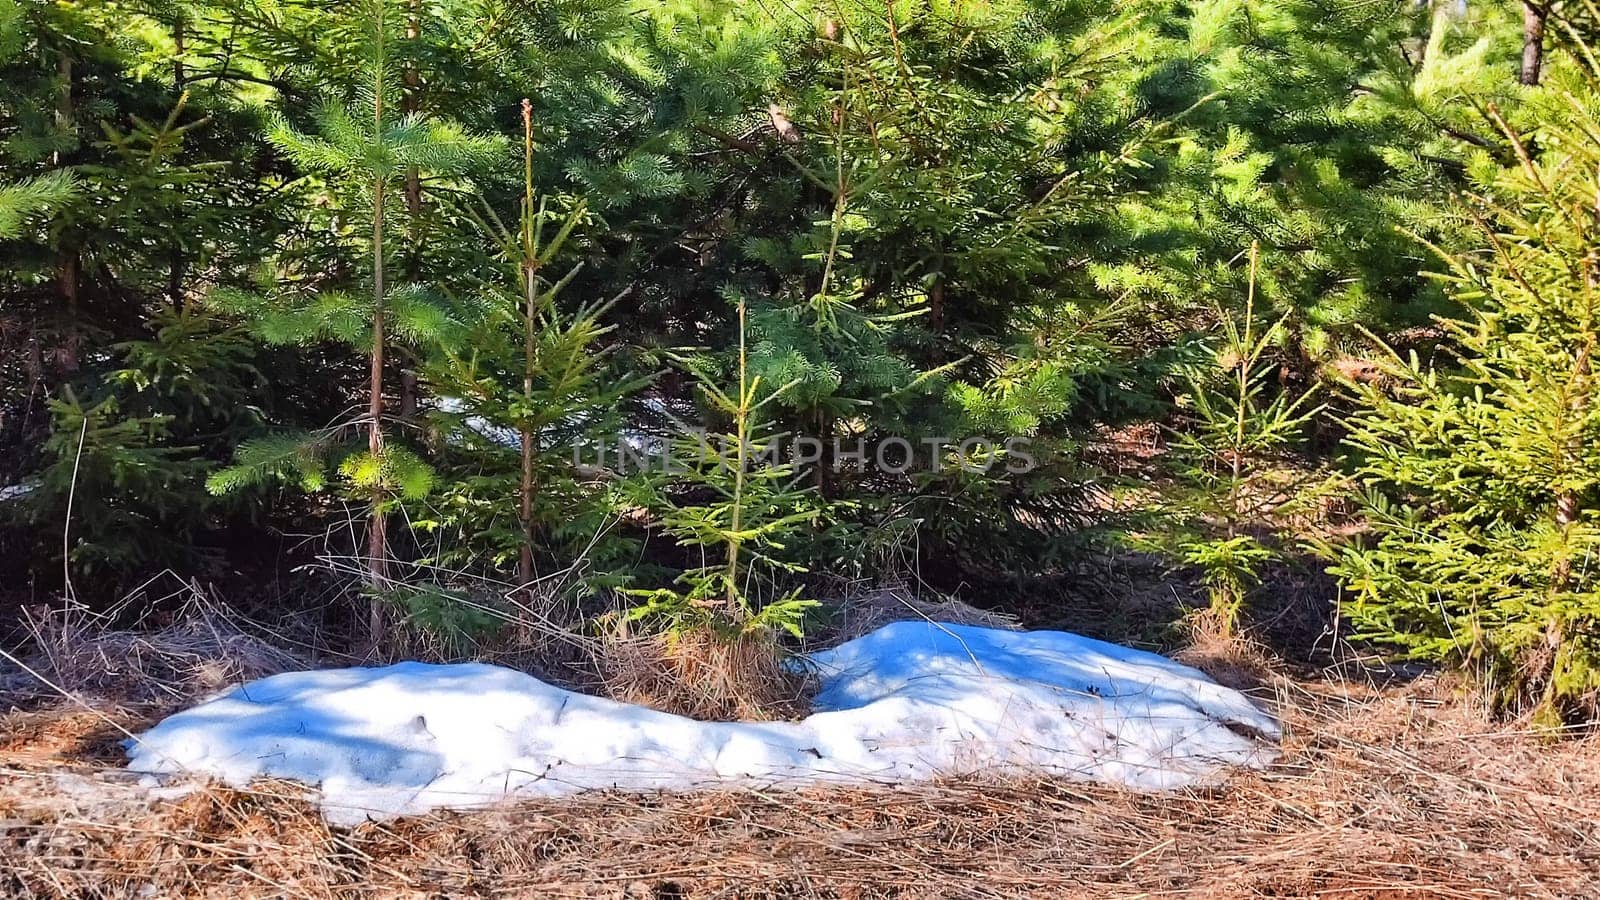 Early Spring Thaw in a Lush Pine Forest With Melting Snowdrifts. Sunlight filters through tall pines as snow melts in the woods